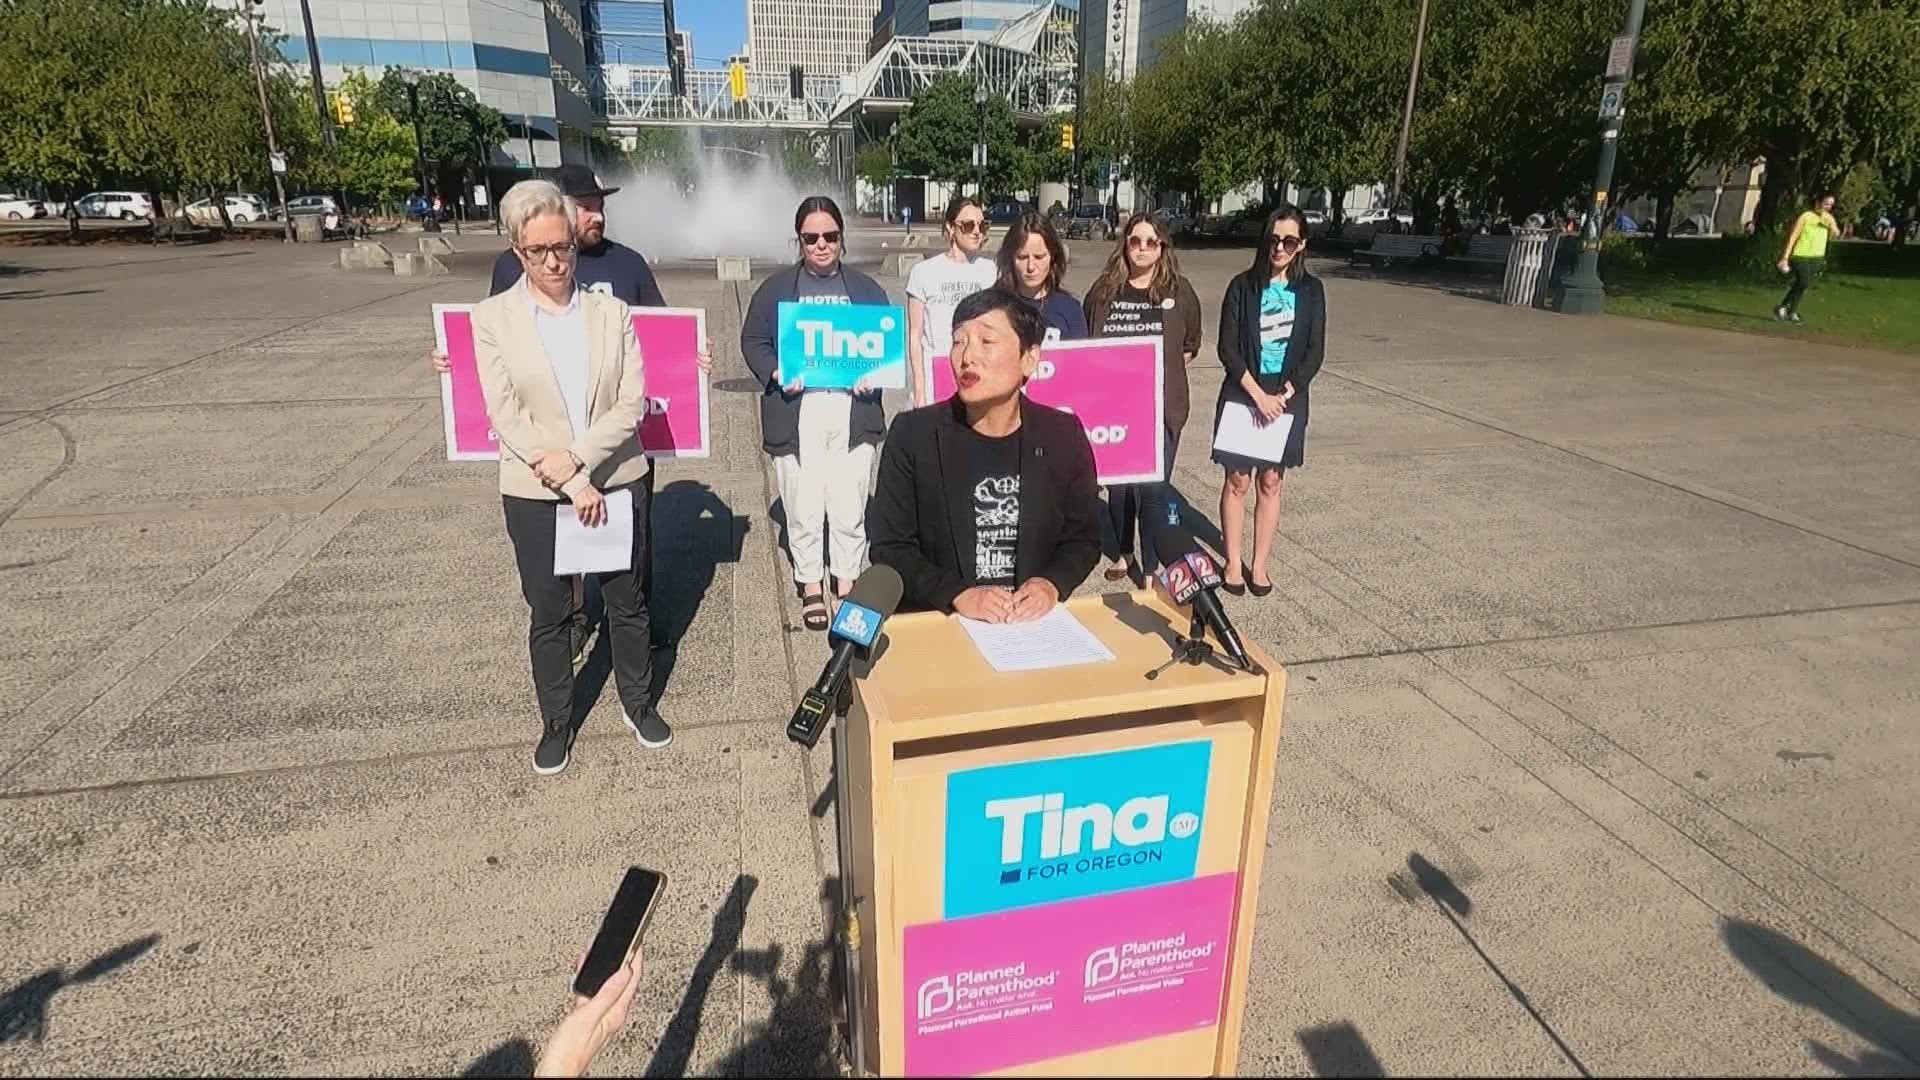 Oregon candidate for governor Tina Kotek joined advocates in condemning the ban. She said it would put pressure on Oregon’s health care system.